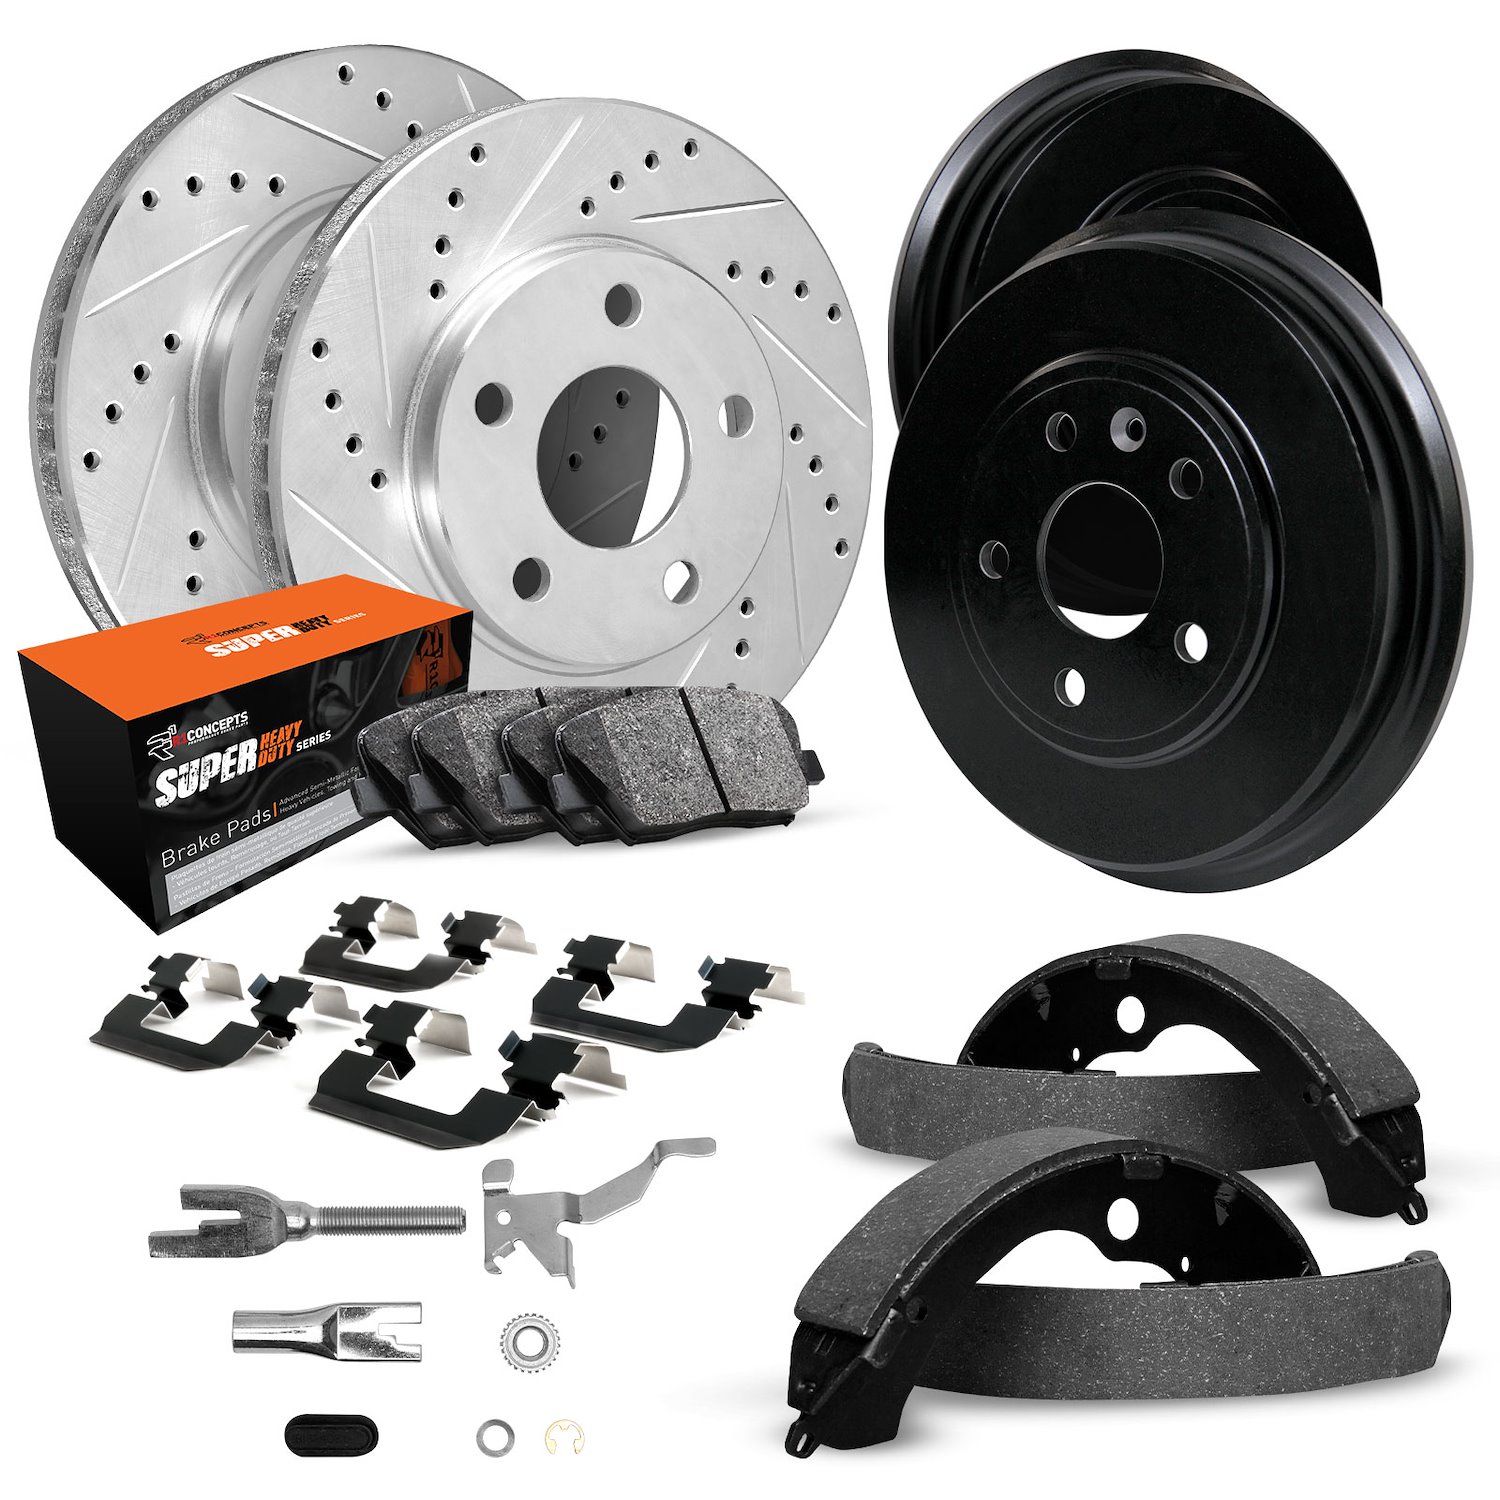 E-Line Drilled/Slotted Silver Rotor & Drum Set w/Super-Duty Pads, Shoes/Hardware/Adjusters, 1974-1983 Mopar